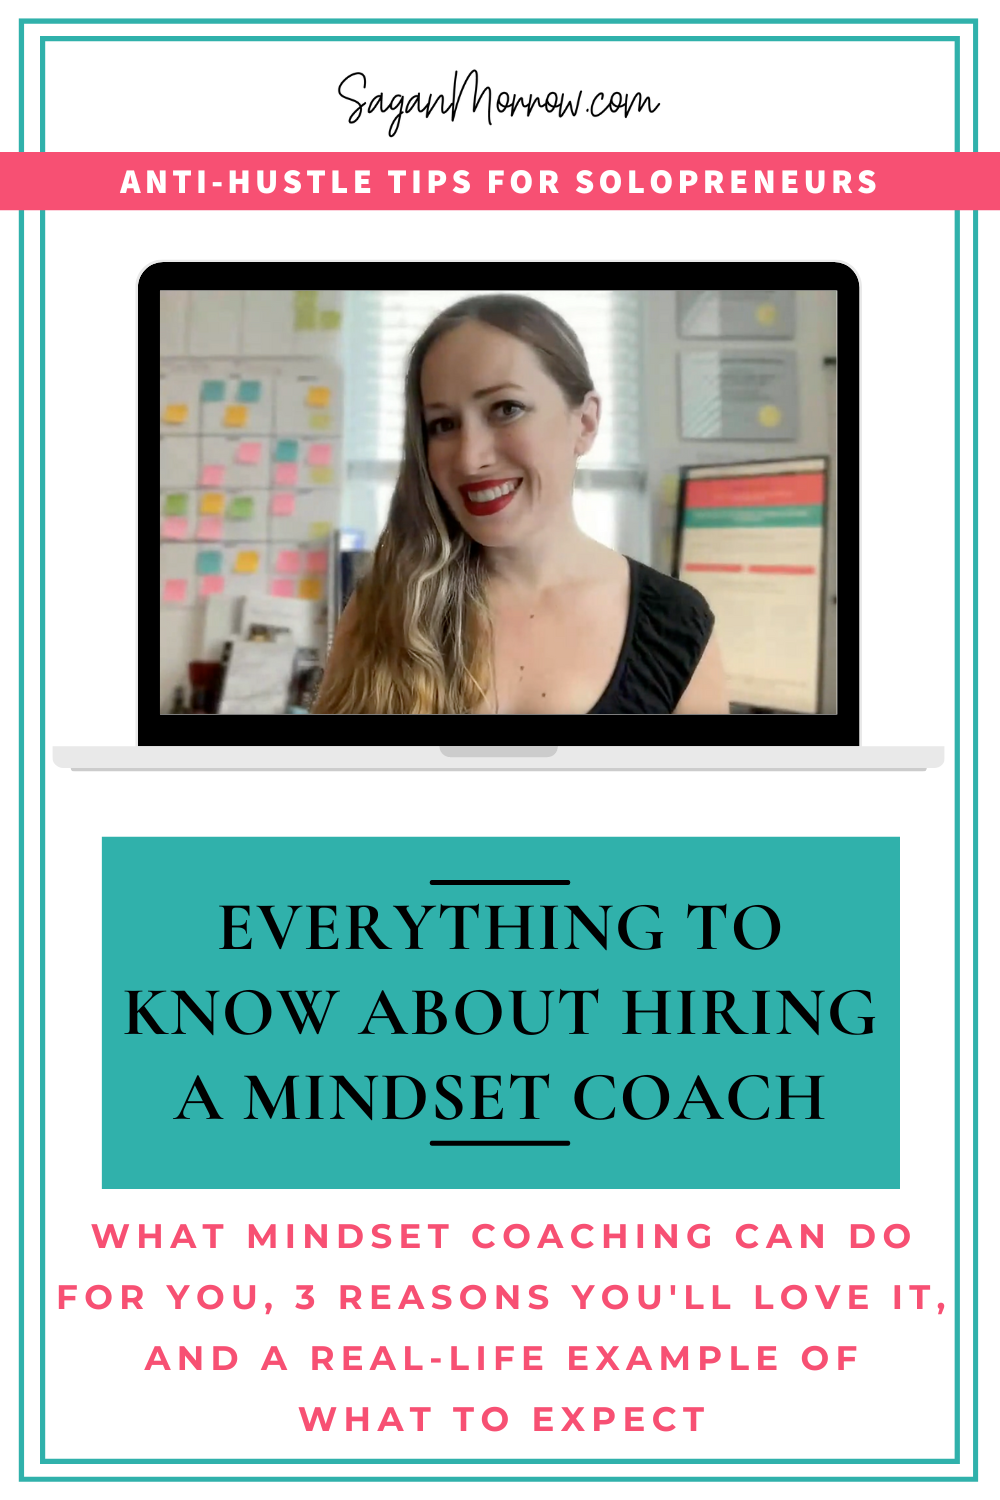 You KNOW you want to make some mindset shifts, but you’re also struggling to do it on your own. That’s where hiring a life coach who specializes in mindset work can help you out! In this video, I want to share with you 3 reasons you’ll love getting mindset coaching with me, 9 specific things that mindset coaching can do for YOU, plus I want to answer a common question I hear: “Isn’t mindset coaching just gaslighting and toxic positivity?” 

Basically, we’re covering everything you want to know about hiring a mindset coach...